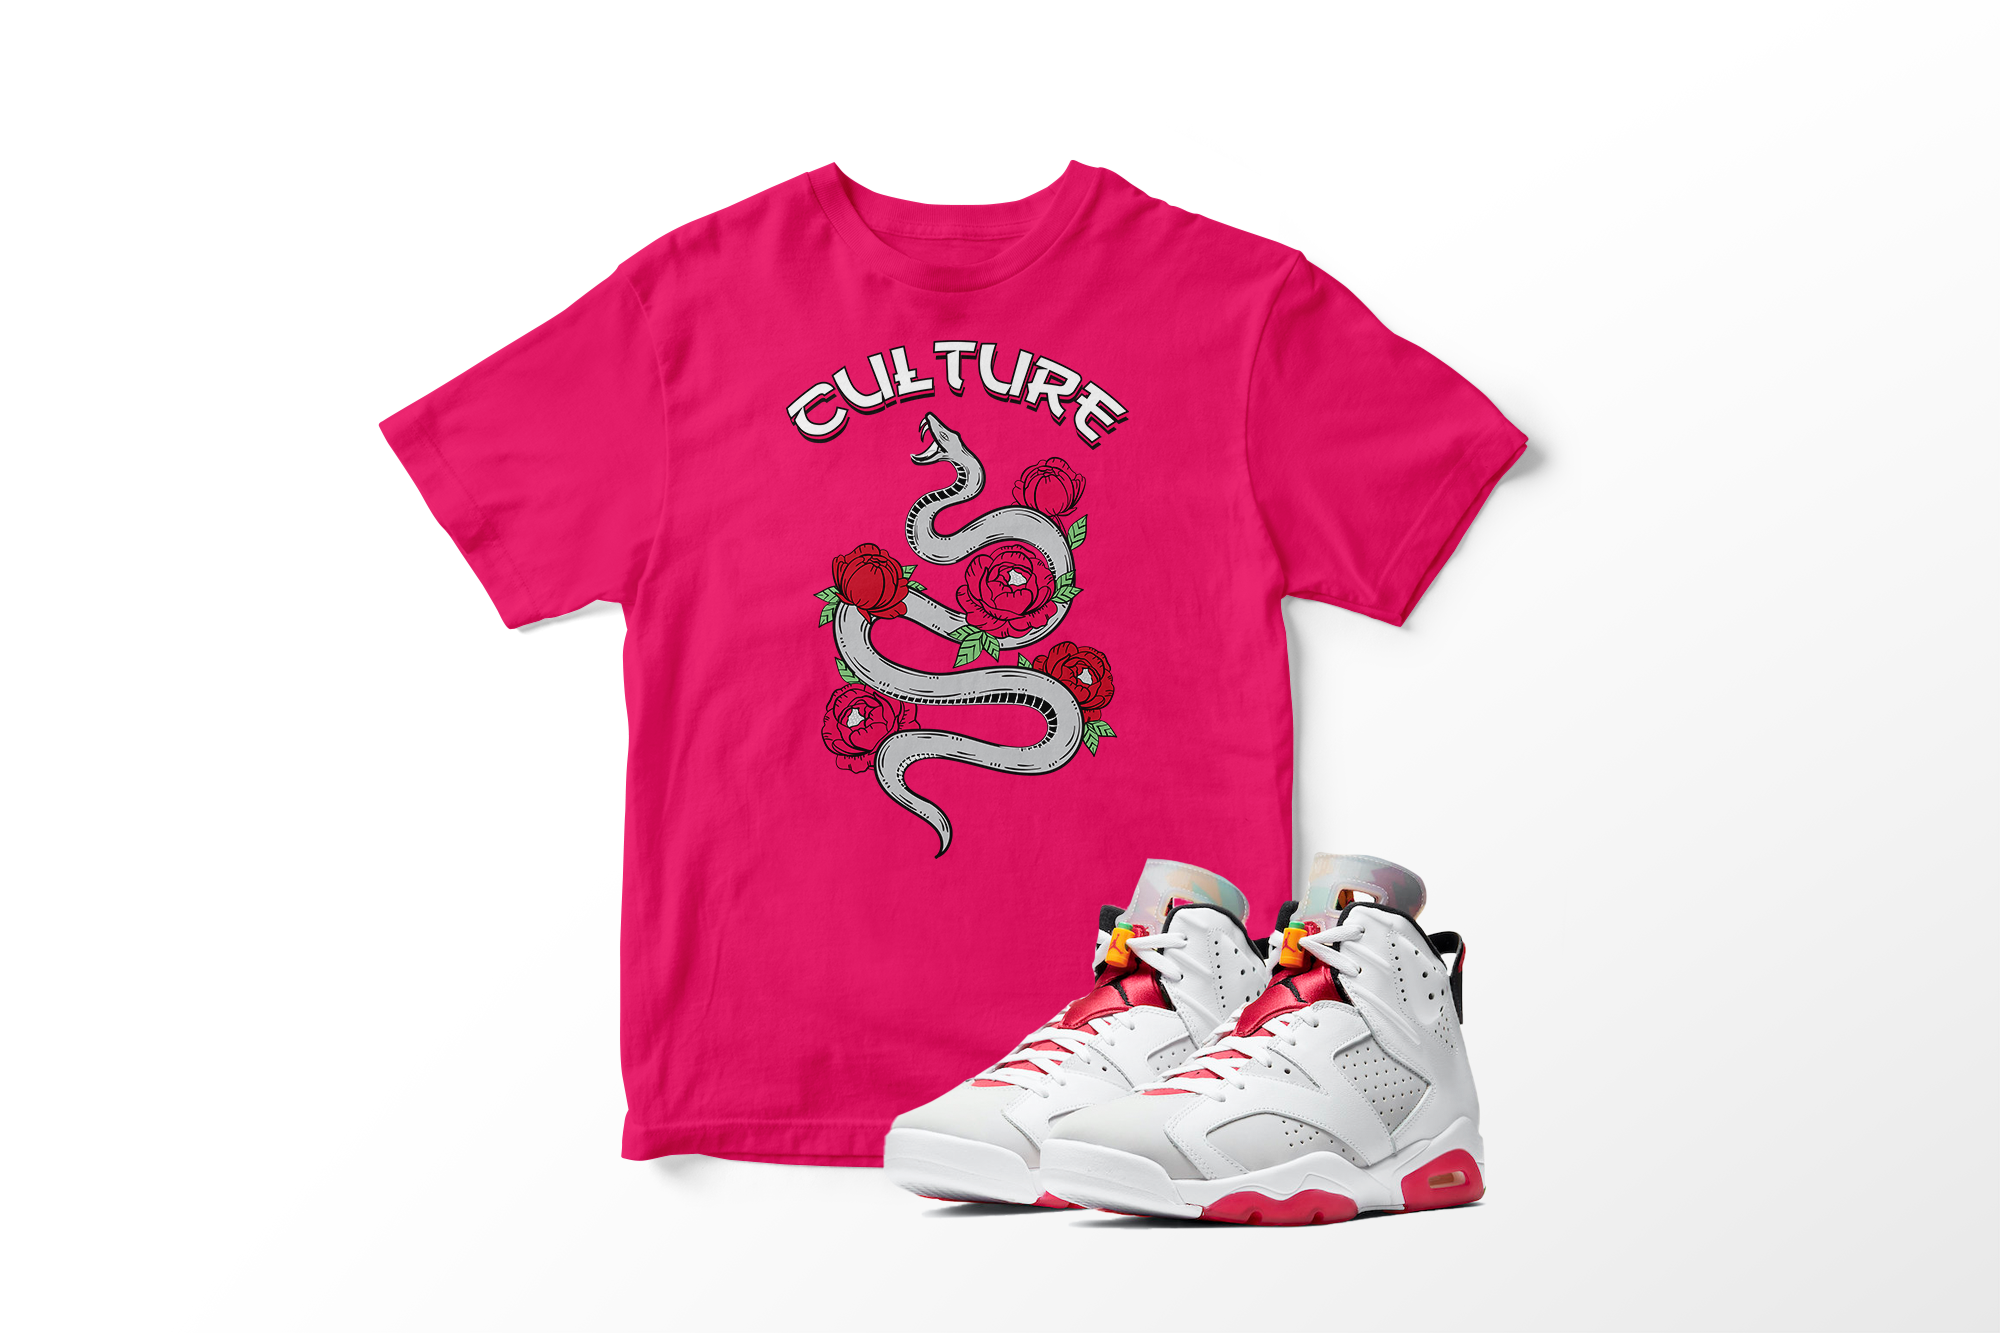 'Culture Snake' in Hare CW Short Sleeve Tee